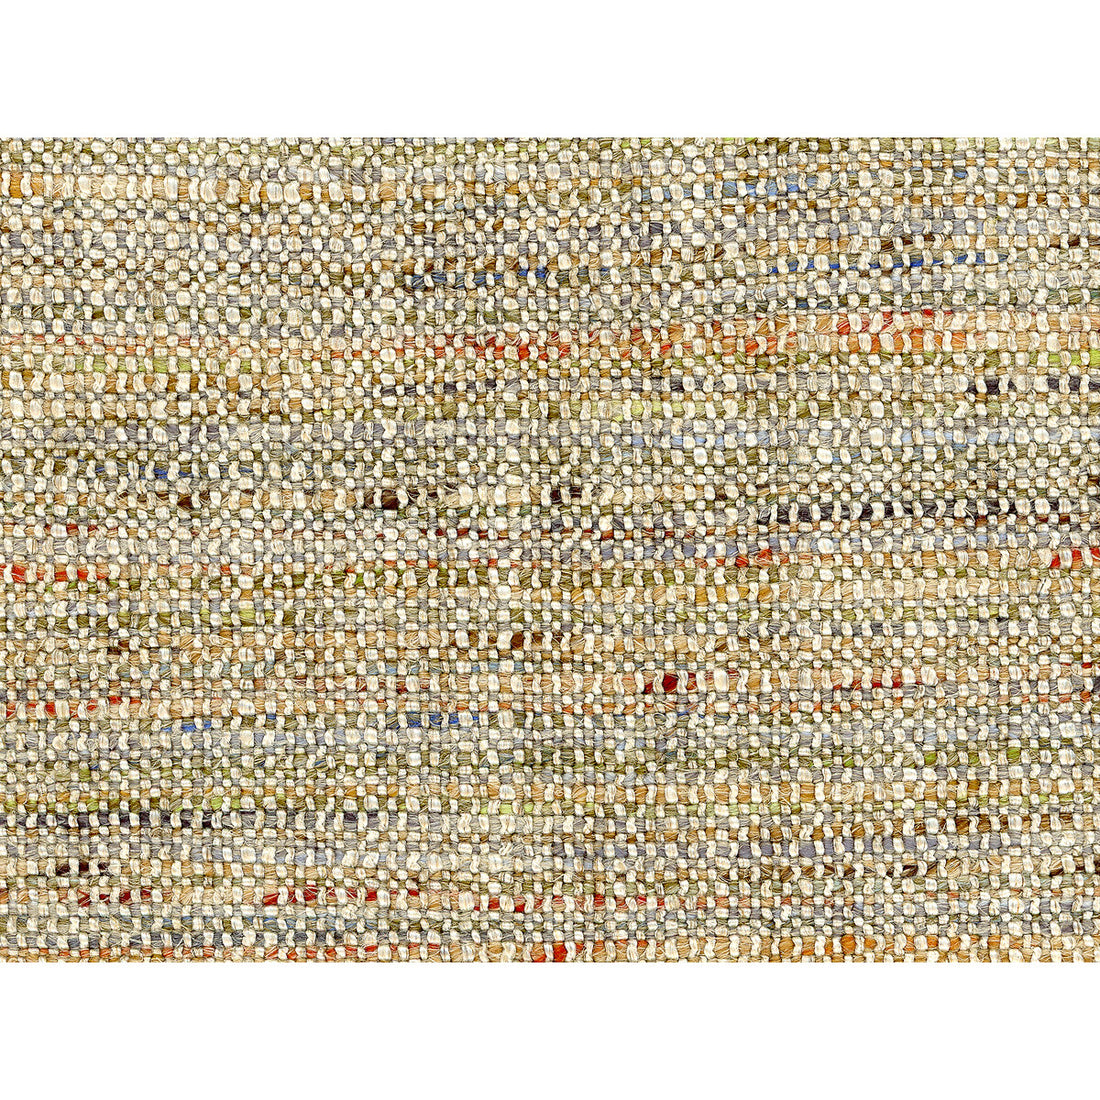 Crafted Cloth fabric in spice color - pattern 34445.1211.0 - by Kravet Couture